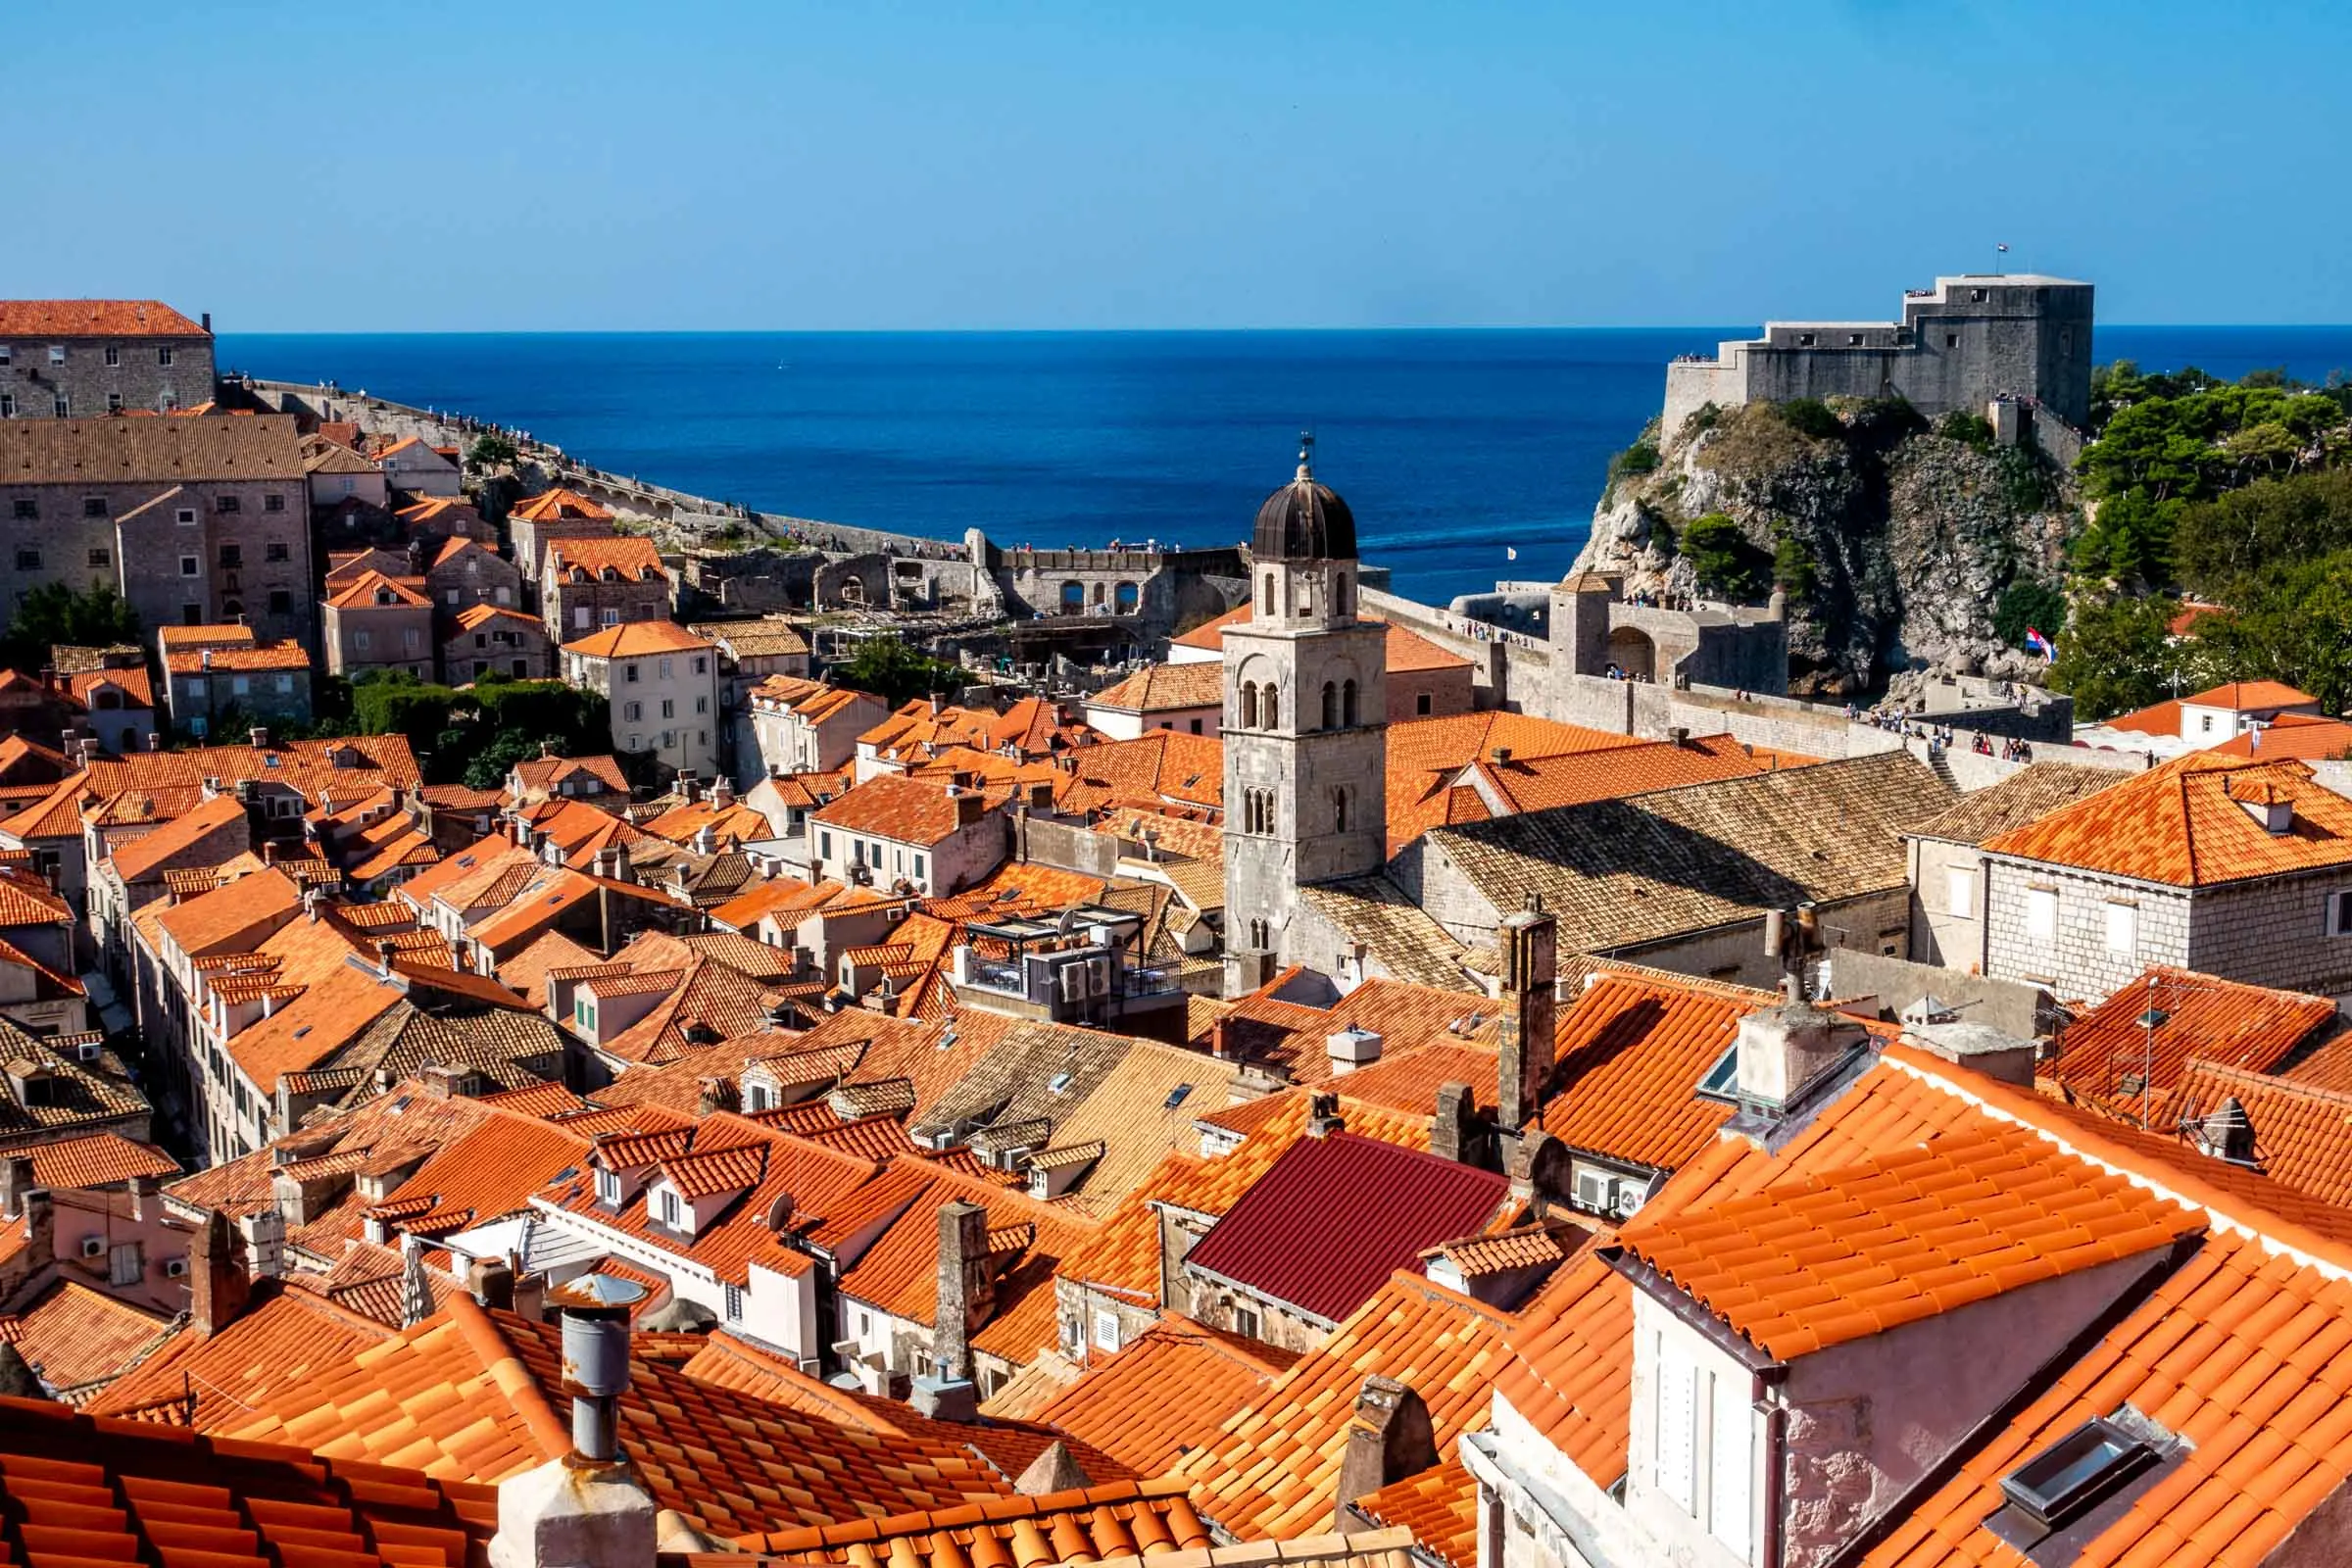 View of red roofs, bell tower, and ancient Dubrovnik city walls